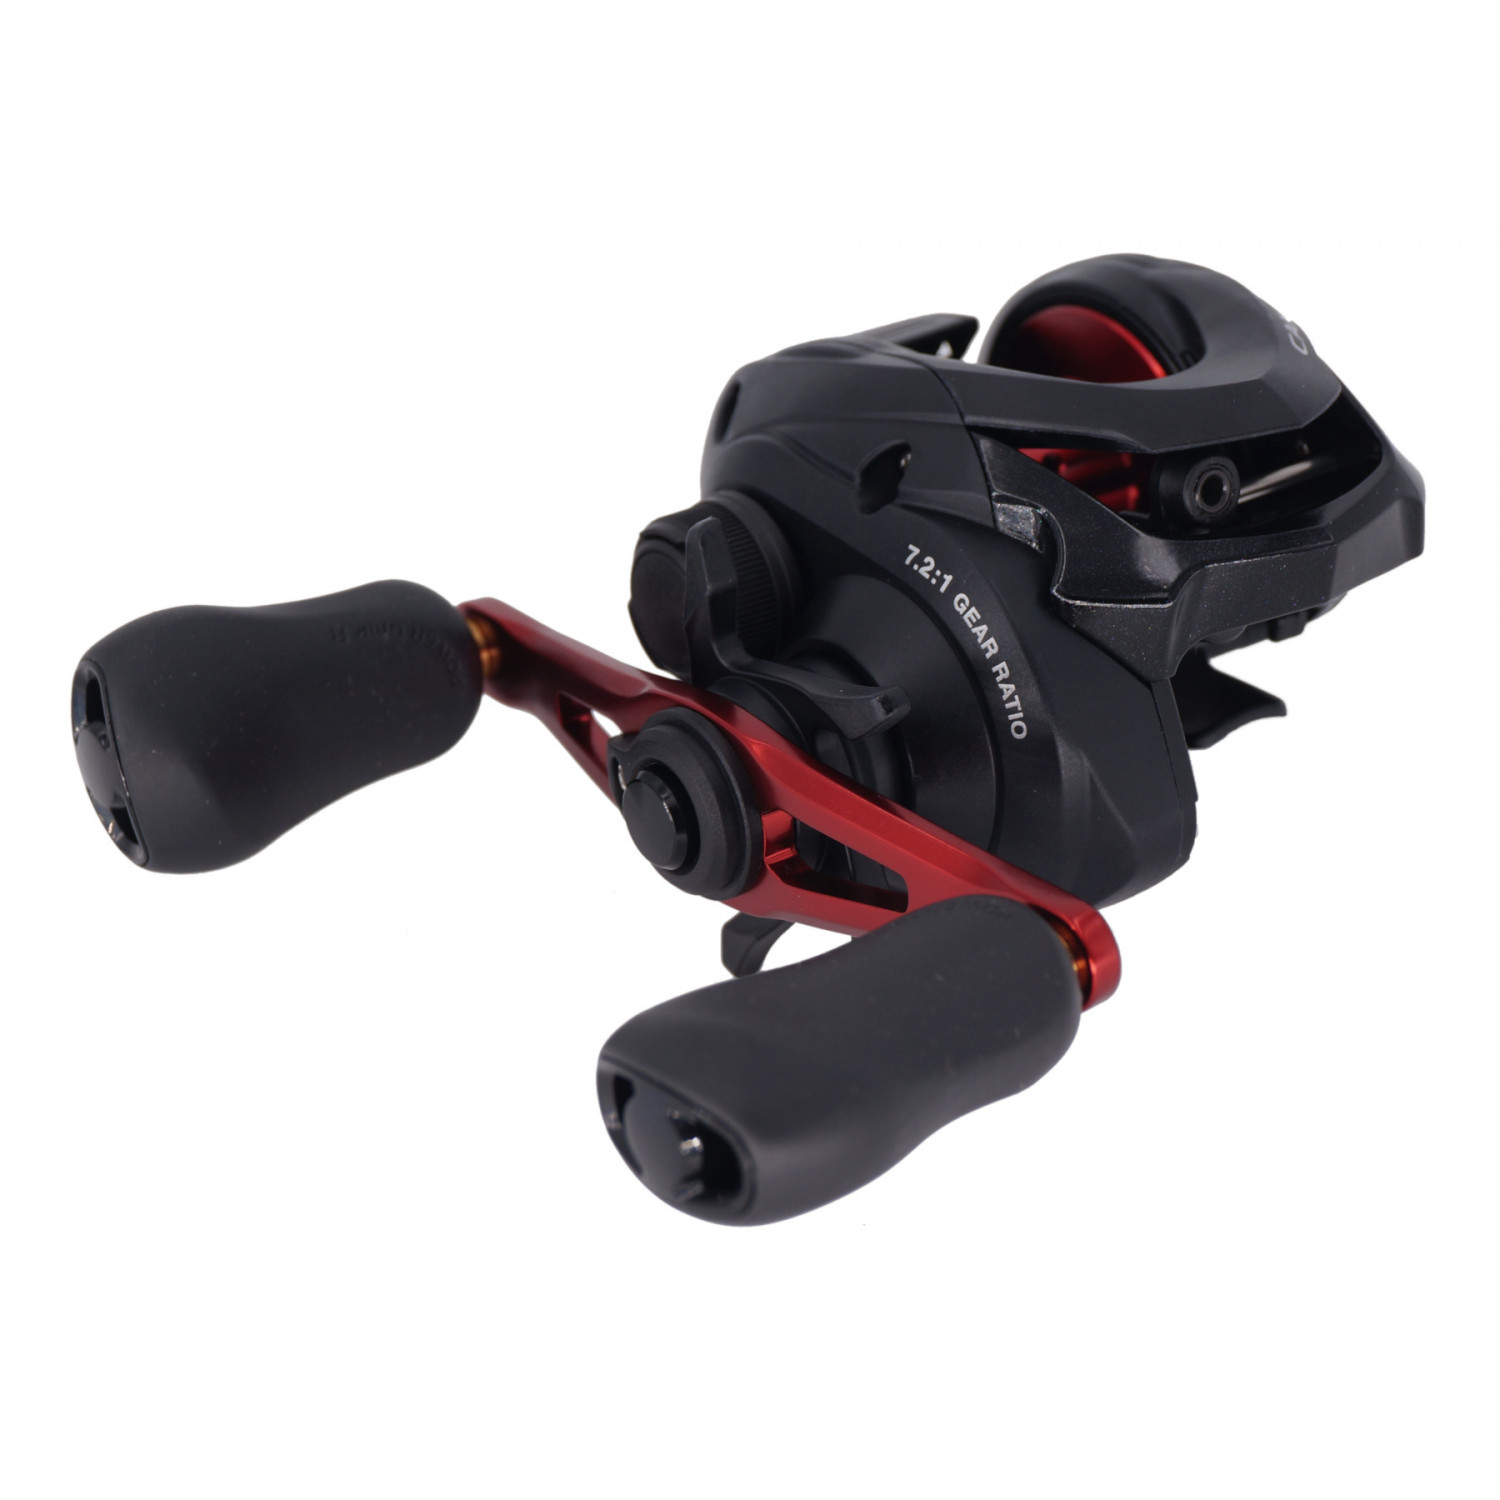 Review Of The Shimano Caius 151 